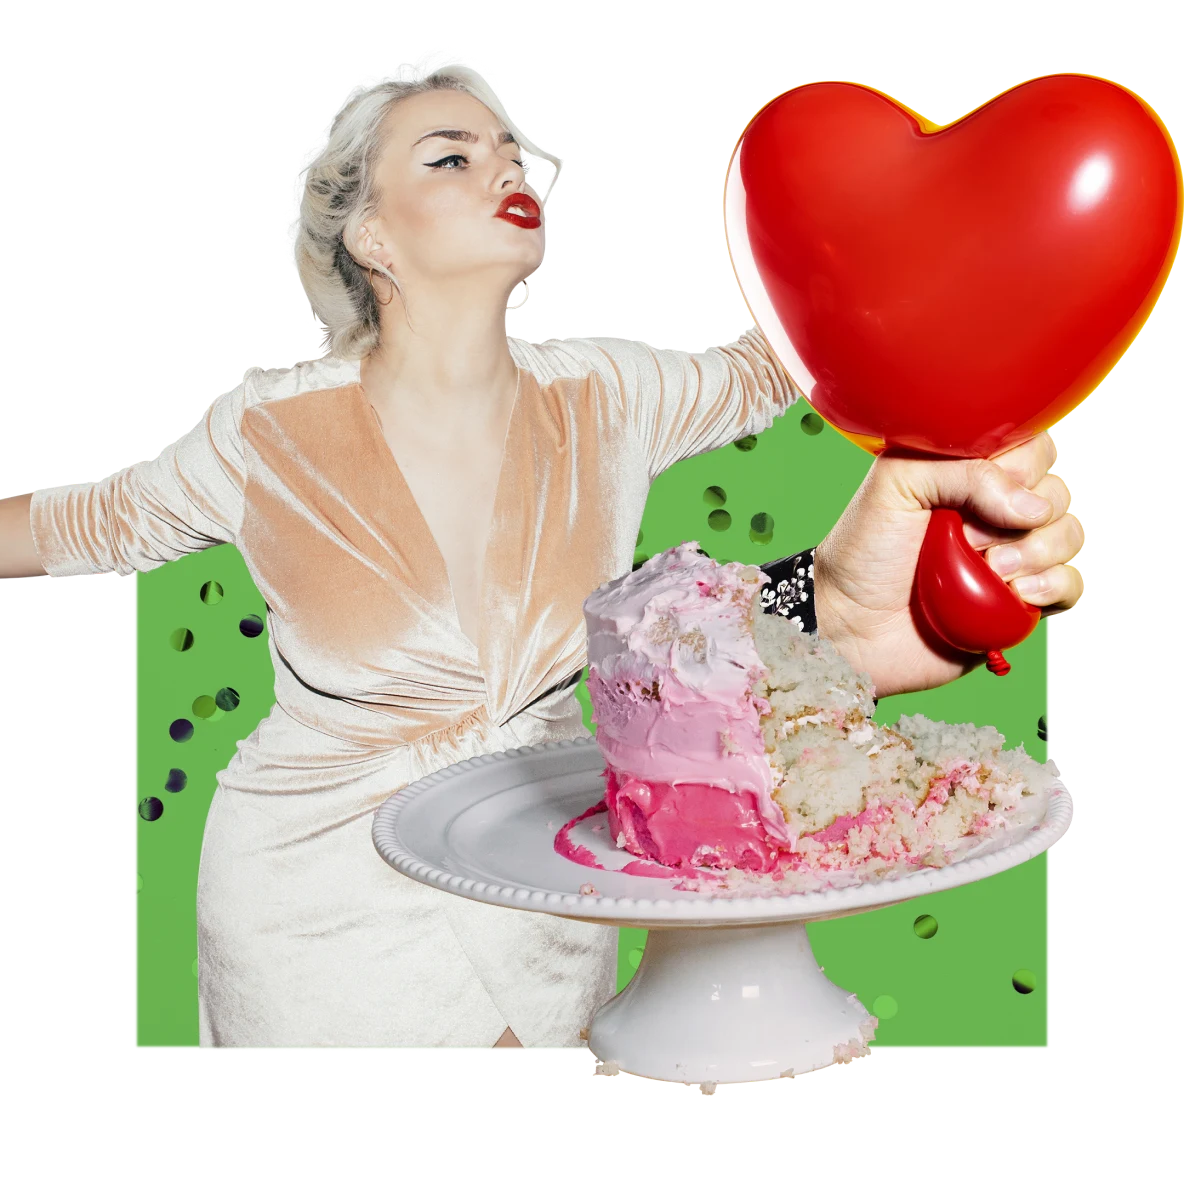 Collage of party themes. On the left, a white woman with blonde hair and bright red lipstick, dances in a pink dress. A half-eaten pink cake on a white platter, is beside her. On the right, a white hand squeezes the bottom of a red, heart-shaped balloon.